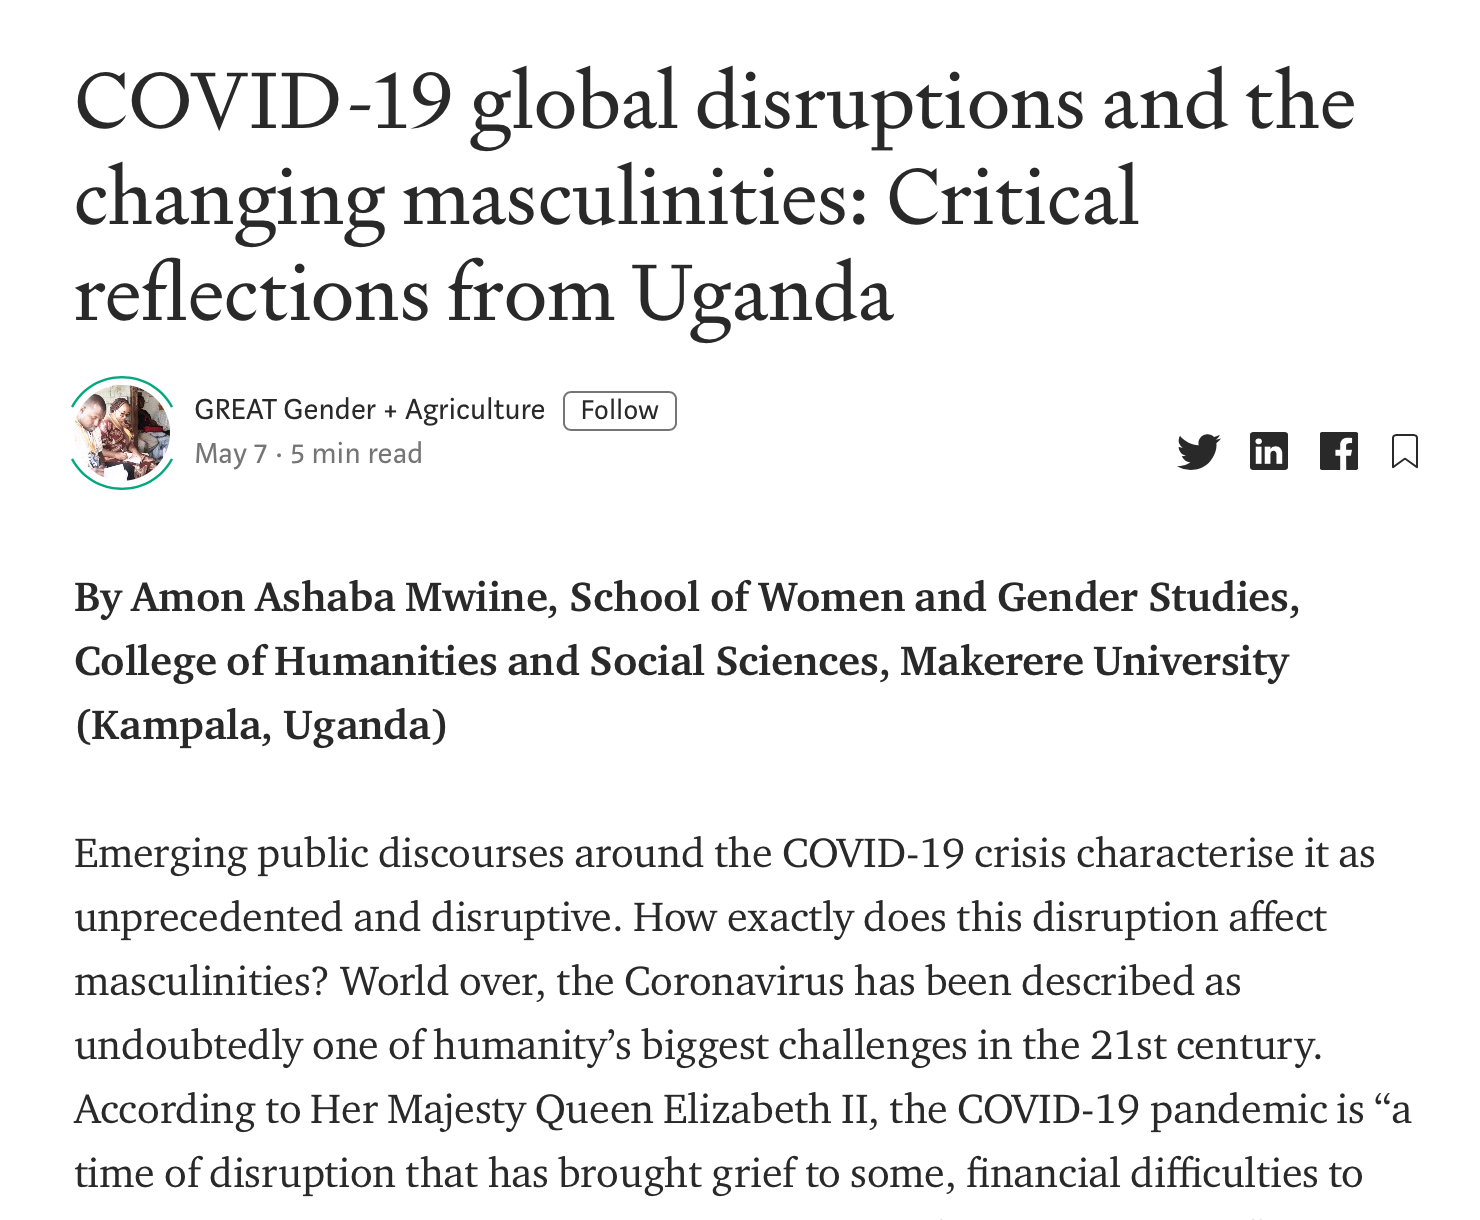 COVID-19 global disruptions and the changing masculinities-Critical reflections from Uganda